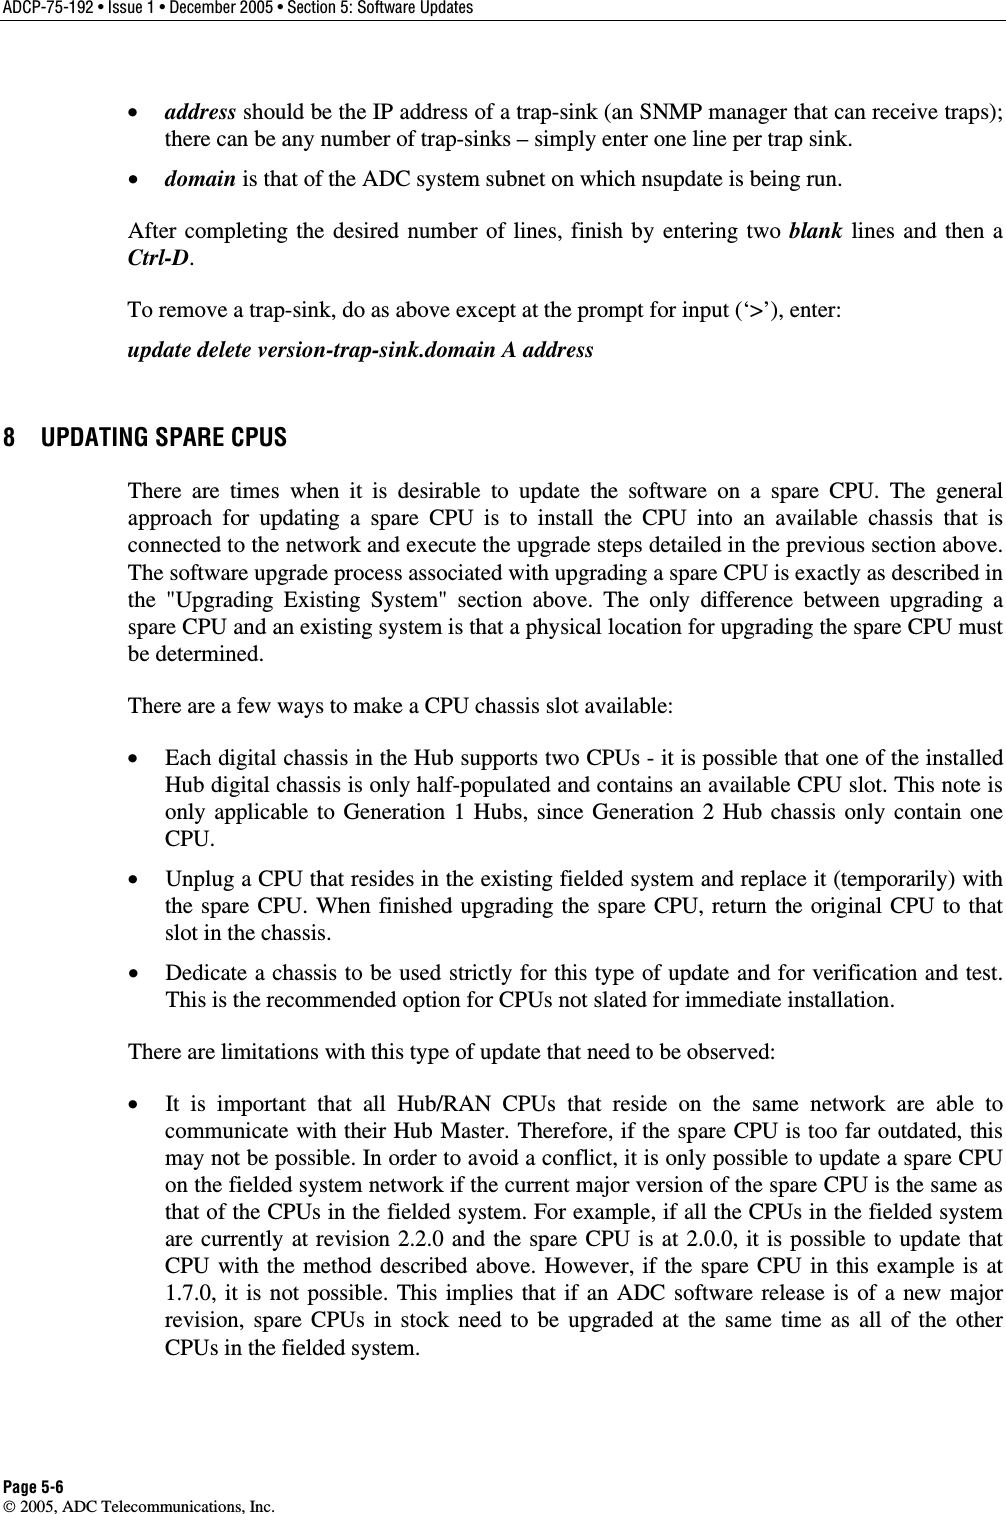 ADCP-75-192 • Issue 1 • December 2005 • Section 5: Software Updates Page 5-6  2005, ADC Telecommunications, Inc. •  address should be the IP address of a trap-sink (an SNMP manager that can receive traps); there can be any number of trap-sinks – simply enter one line per trap sink. •  domain is that of the ADC system subnet on which nsupdate is being run. After completing the desired number of lines, finish by entering two blank lines and then a Ctrl-D. To remove a trap-sink, do as above except at the prompt for input (‘&gt;’), enter:  update delete version-trap-sink.domain A address 8  UPDATING SPARE CPUS There are times when it is desirable to update the software on a spare CPU. The general approach for updating a spare CPU is to install the CPU into an available chassis that is connected to the network and execute the upgrade steps detailed in the previous section above. The software upgrade process associated with upgrading a spare CPU is exactly as described in the &quot;Upgrading Existing System&quot; section above. The only difference between upgrading a spare CPU and an existing system is that a physical location for upgrading the spare CPU must be determined. There are a few ways to make a CPU chassis slot available: •  Each digital chassis in the Hub supports two CPUs - it is possible that one of the installed Hub digital chassis is only half-populated and contains an available CPU slot. This note is only applicable to Generation 1 Hubs, since Generation 2 Hub chassis only contain one CPU. •  Unplug a CPU that resides in the existing fielded system and replace it (temporarily) with the spare CPU. When finished upgrading the spare CPU, return the original CPU to that slot in the chassis. •  Dedicate a chassis to be used strictly for this type of update and for verification and test. This is the recommended option for CPUs not slated for immediate installation. There are limitations with this type of update that need to be observed: •  It is important that all Hub/RAN CPUs that reside on the same network are able to communicate with their Hub Master. Therefore, if the spare CPU is too far outdated, this may not be possible. In order to avoid a conflict, it is only possible to update a spare CPU on the fielded system network if the current major version of the spare CPU is the same as that of the CPUs in the fielded system. For example, if all the CPUs in the fielded system are currently at revision 2.2.0 and the spare CPU is at 2.0.0, it is possible to update that CPU with the method described above. However, if the spare CPU in this example is at 1.7.0, it is not possible. This implies that if an ADC software release is of a new major revision, spare CPUs in stock need to be upgraded at the same time as all of the other CPUs in the fielded system.  